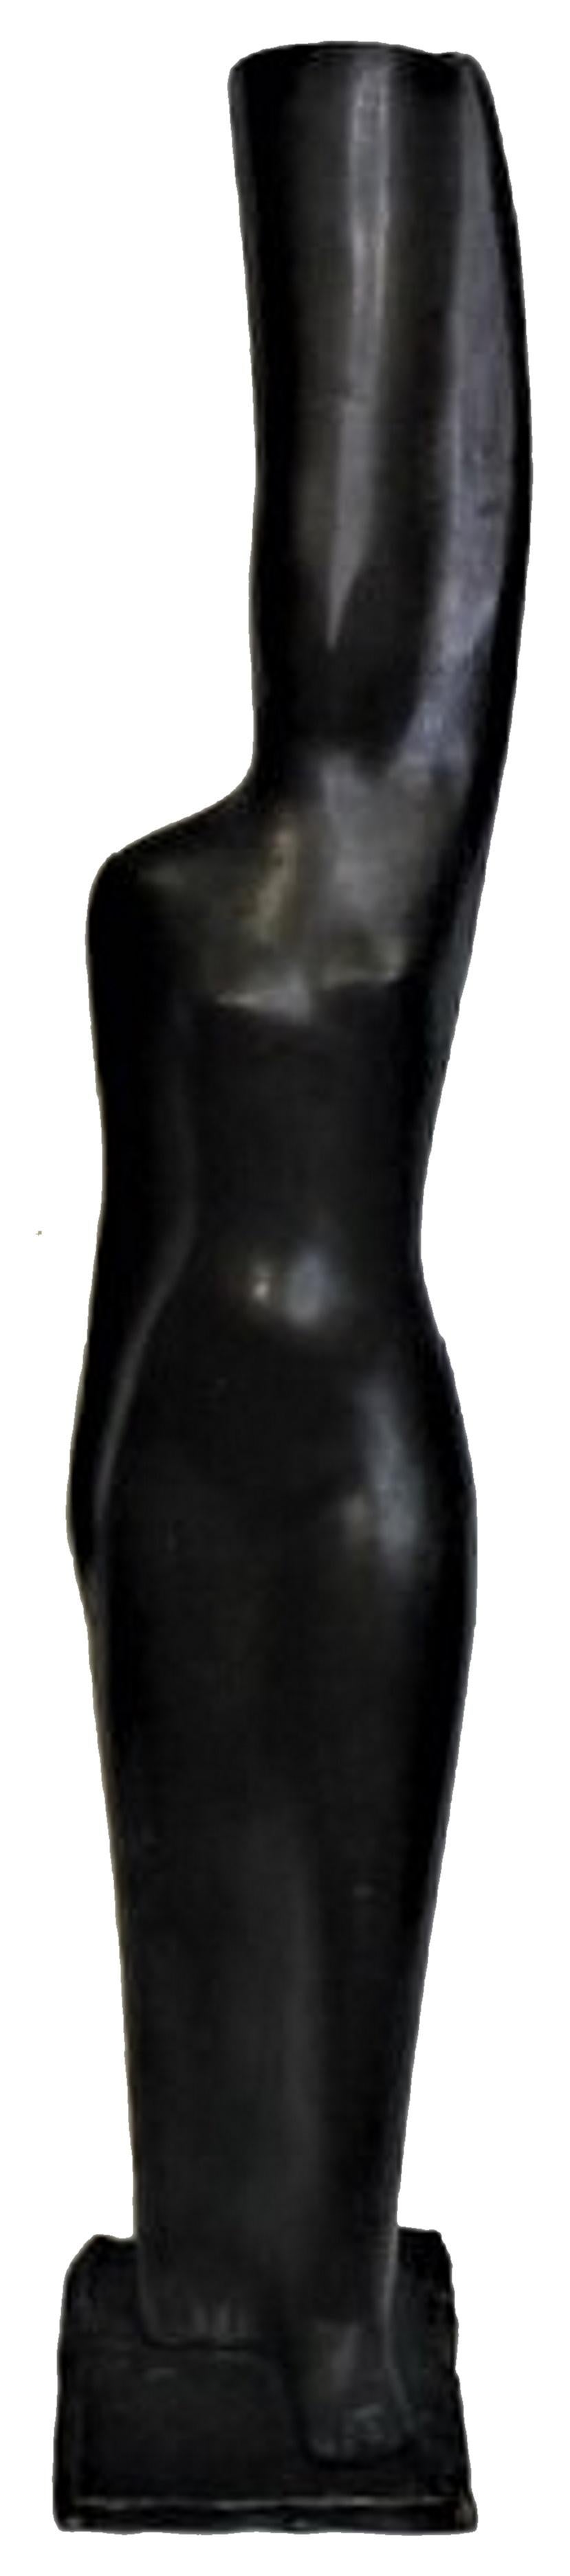 French Modernist Abstract Bronze Sculpture of a Woman Carrying a Vessel, c. 1960 For Sale 6